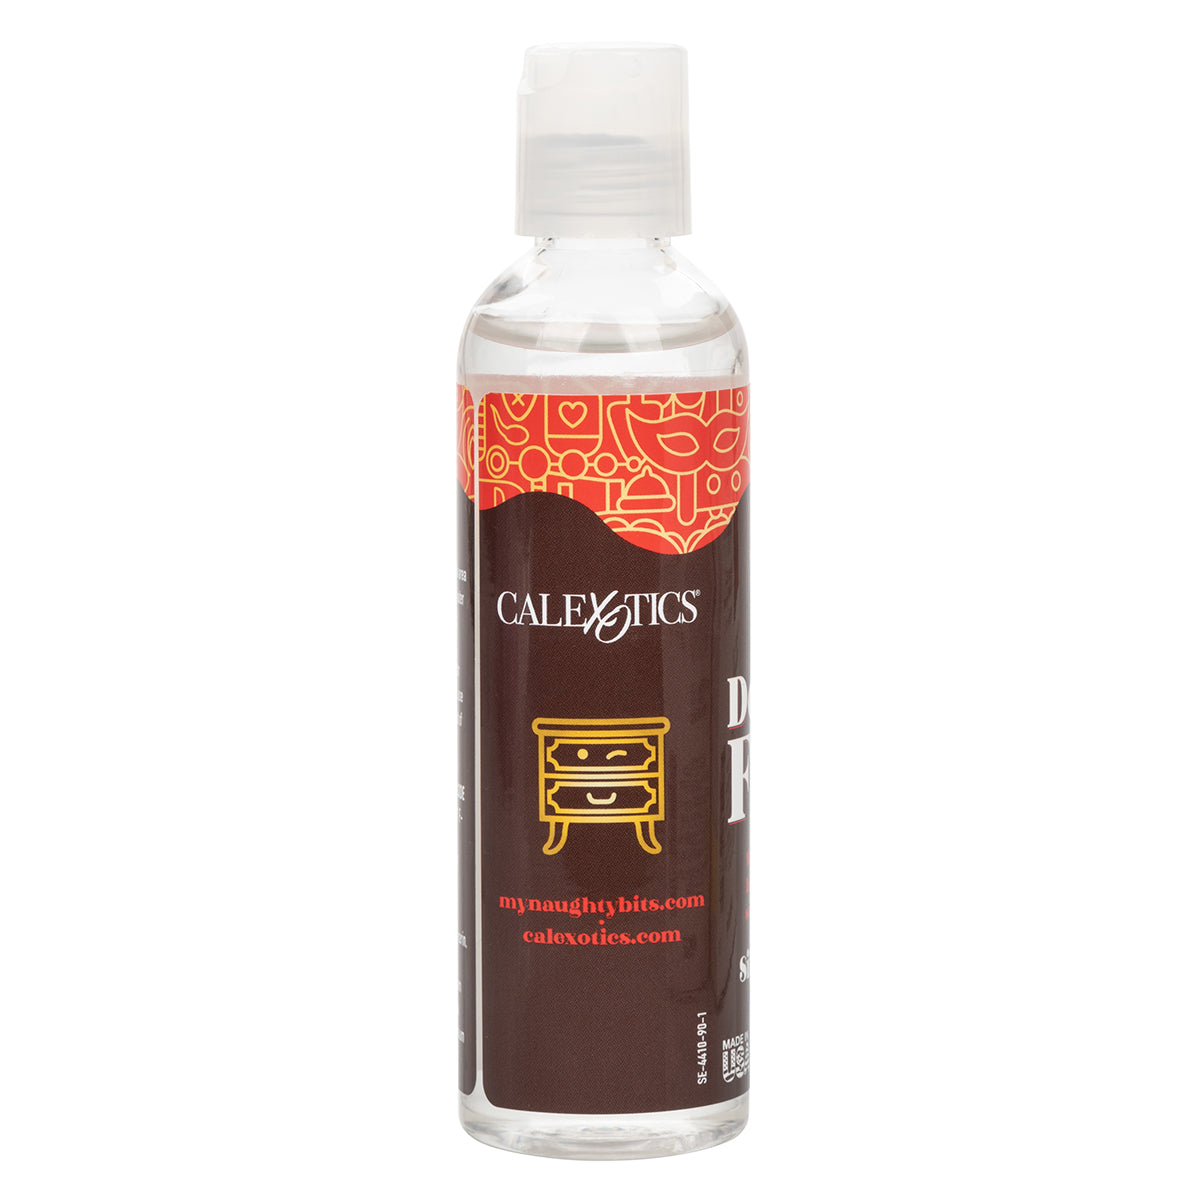 CalExotics Down to Fuck – Water-Based Lubricant – 4oz/118ml